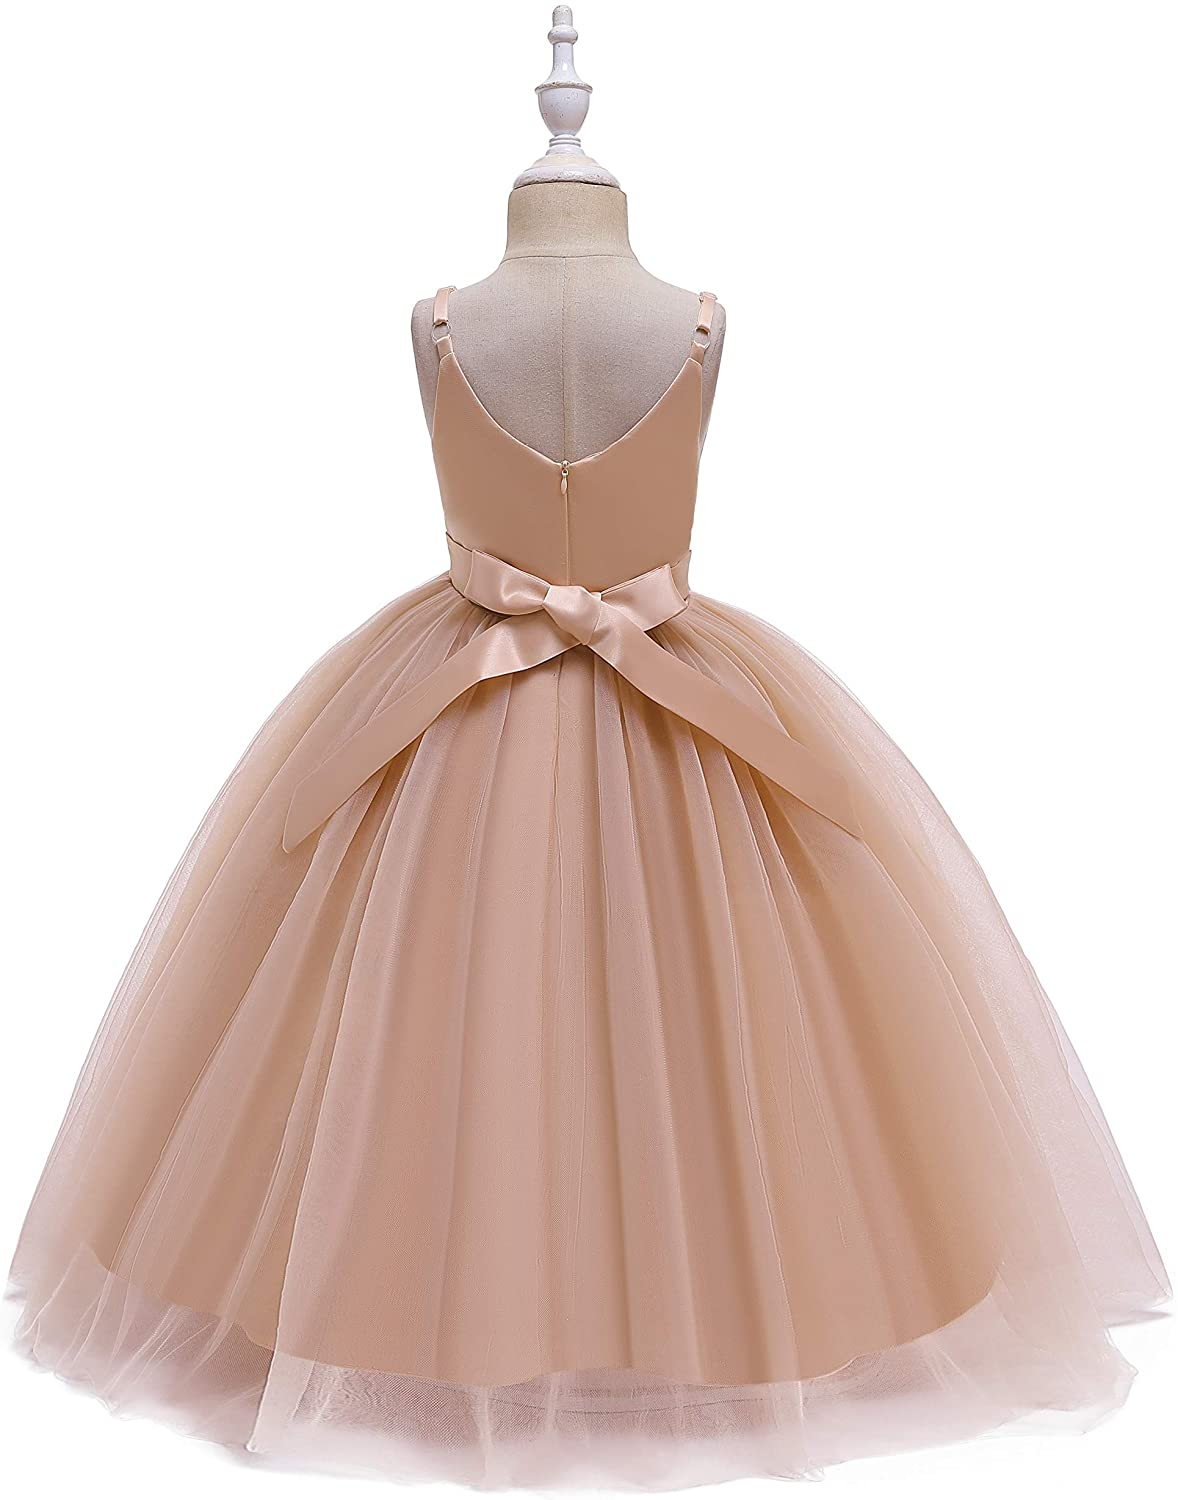 "Elegant Lace Flower Girl Dresses for Weddings and Pageants: A-Line Tulle Gowns for Special Occasions"